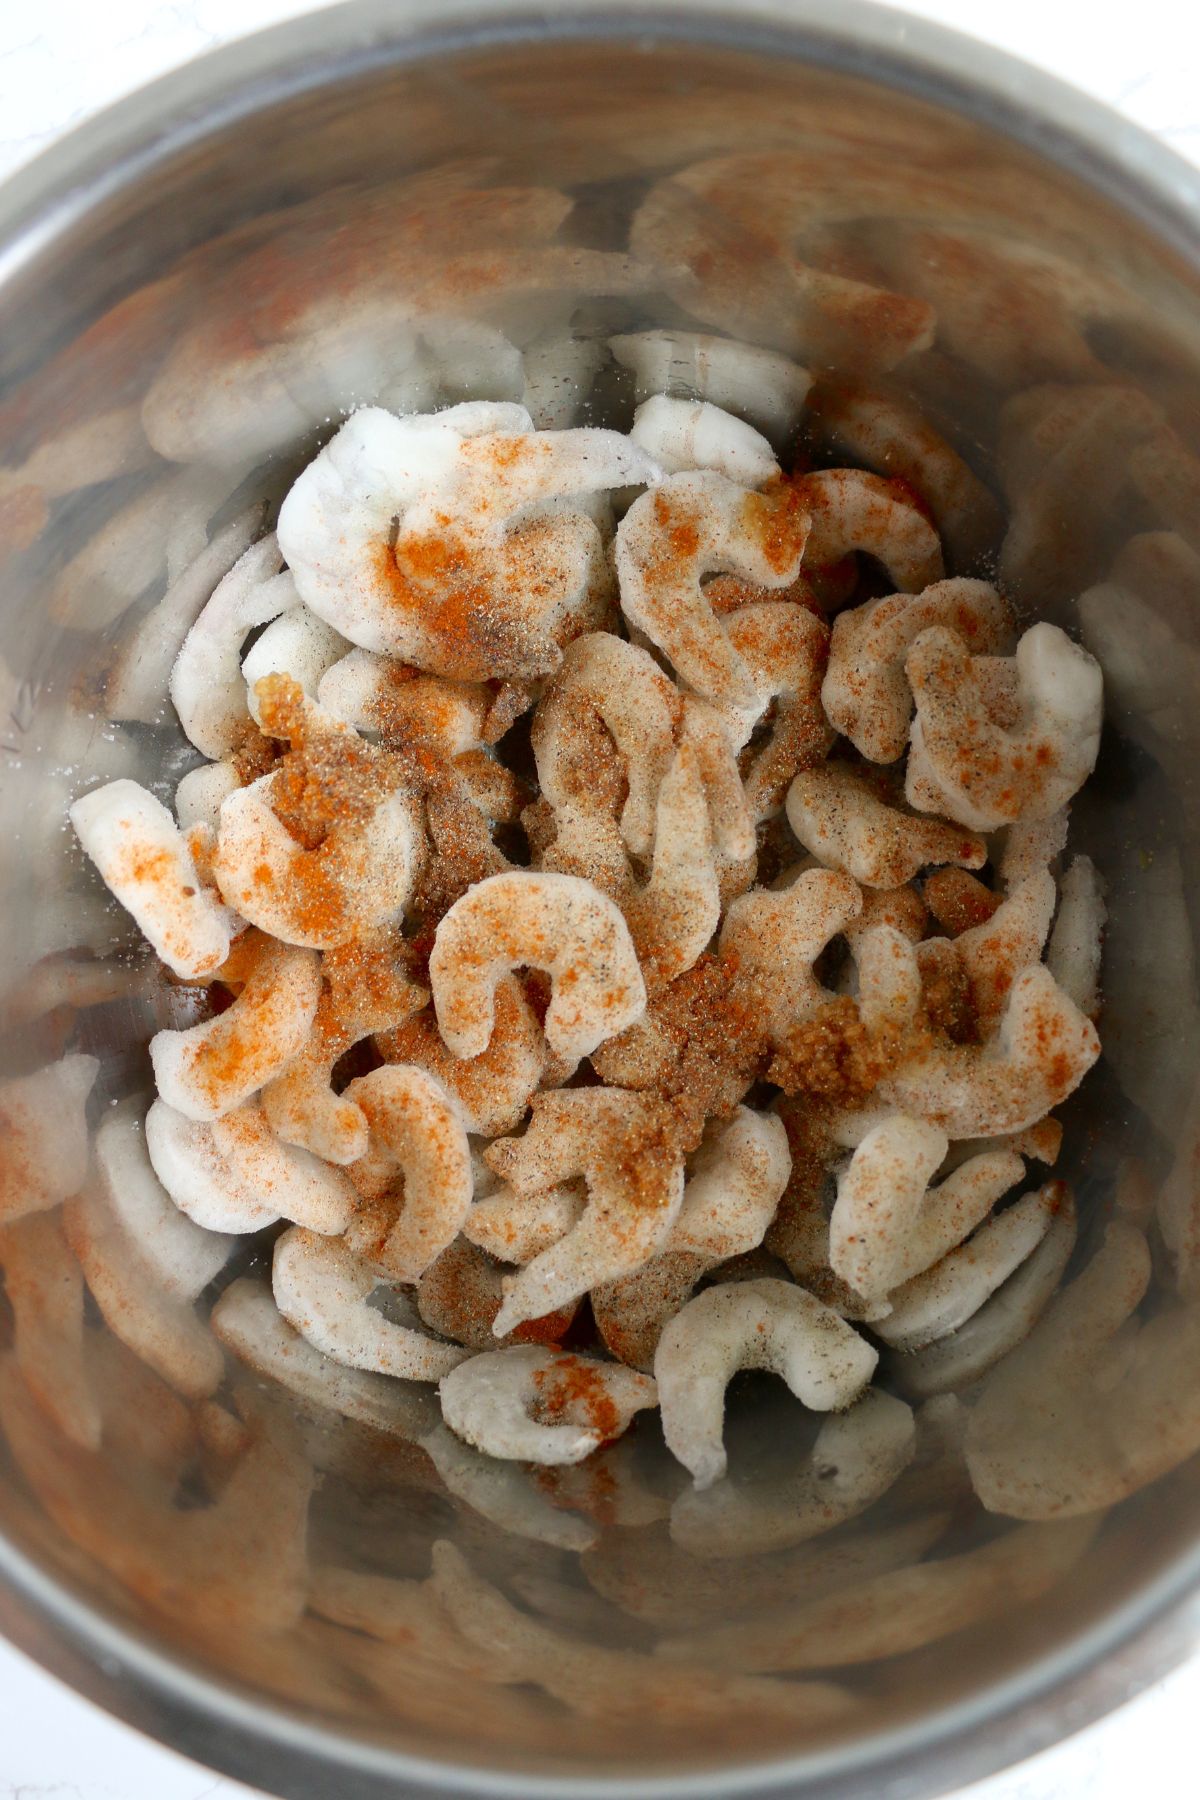 Frozen shrimp seasoned in the instant pot before being cooked.